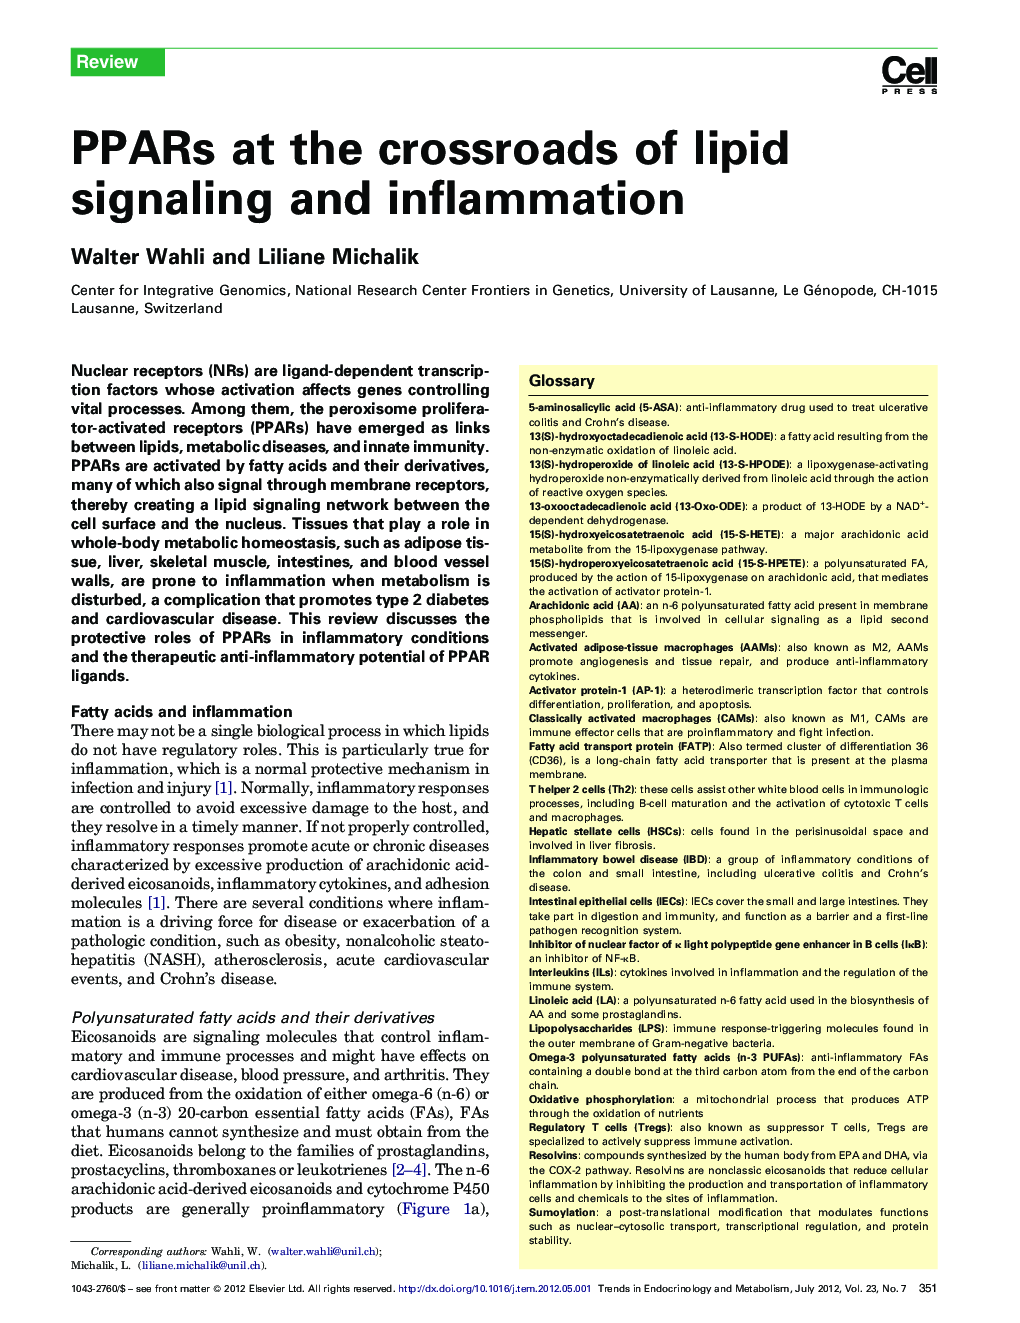 PPARs at the crossroads of lipid signaling and inflammation